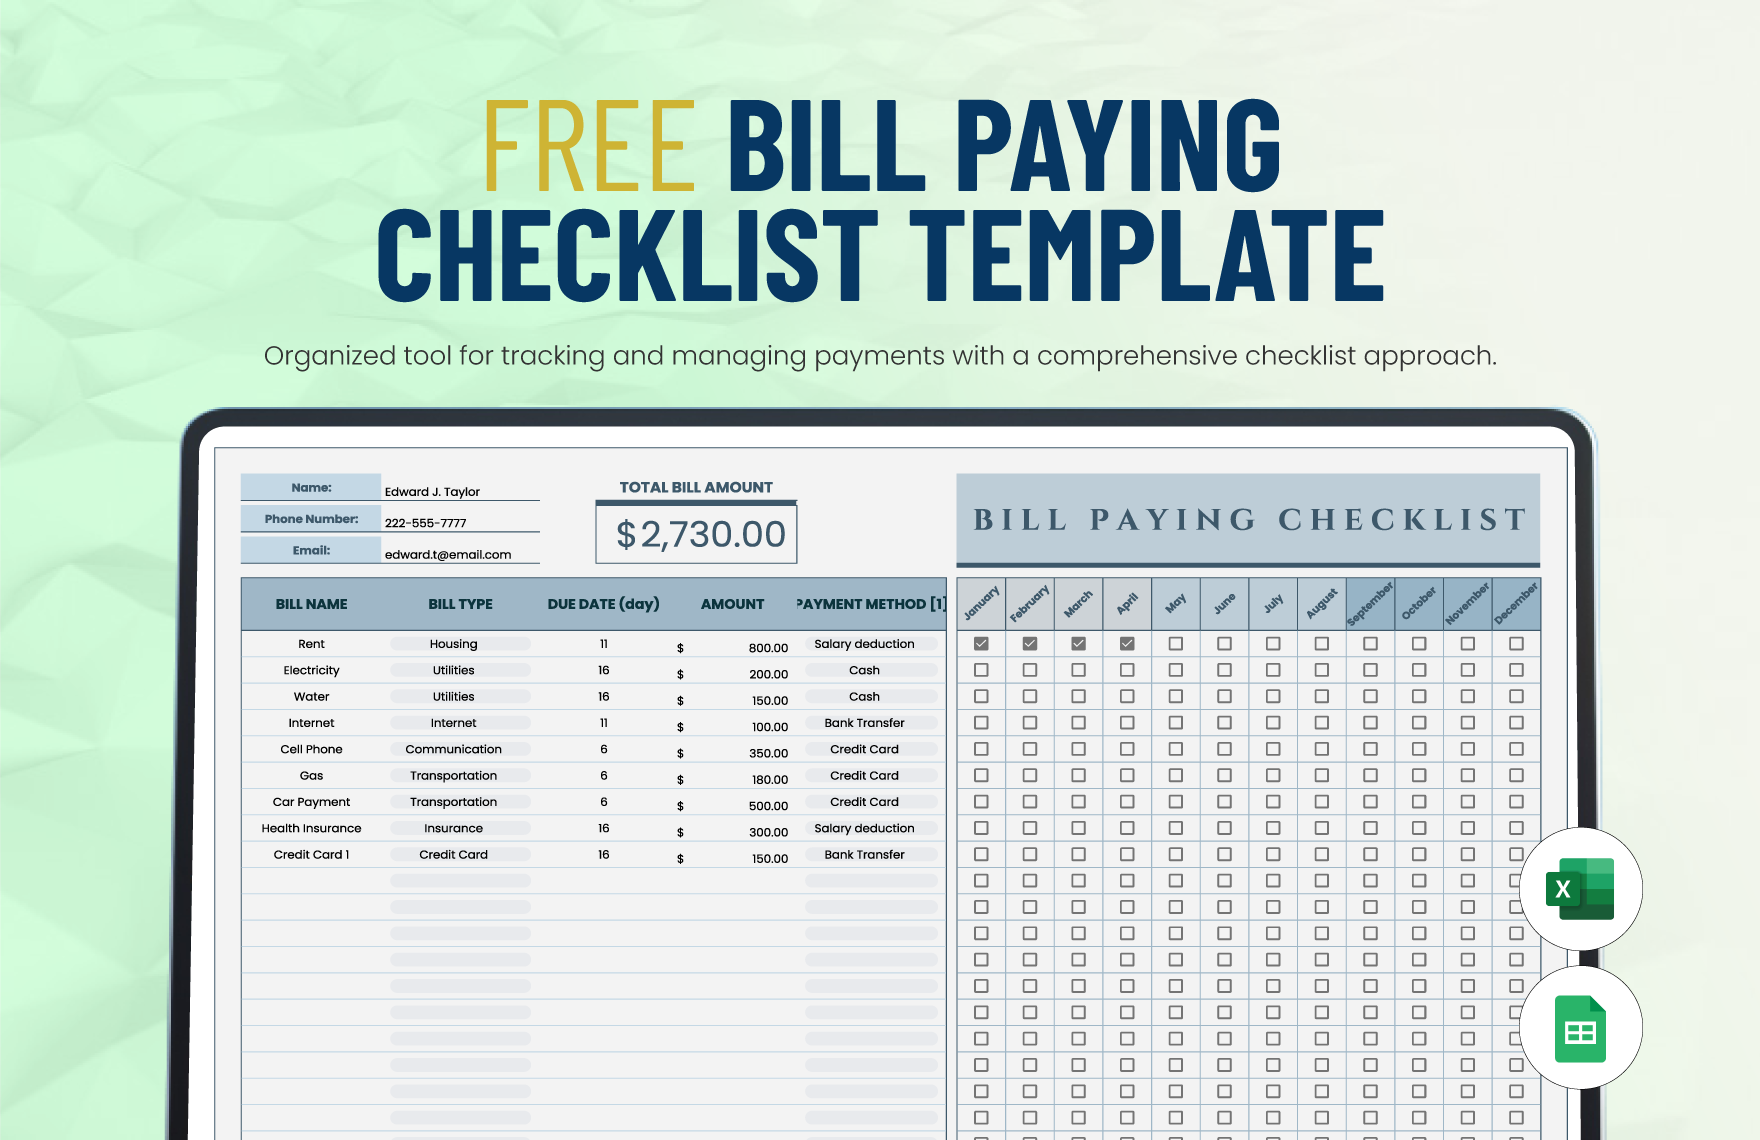 Bill Paying Checklist Template